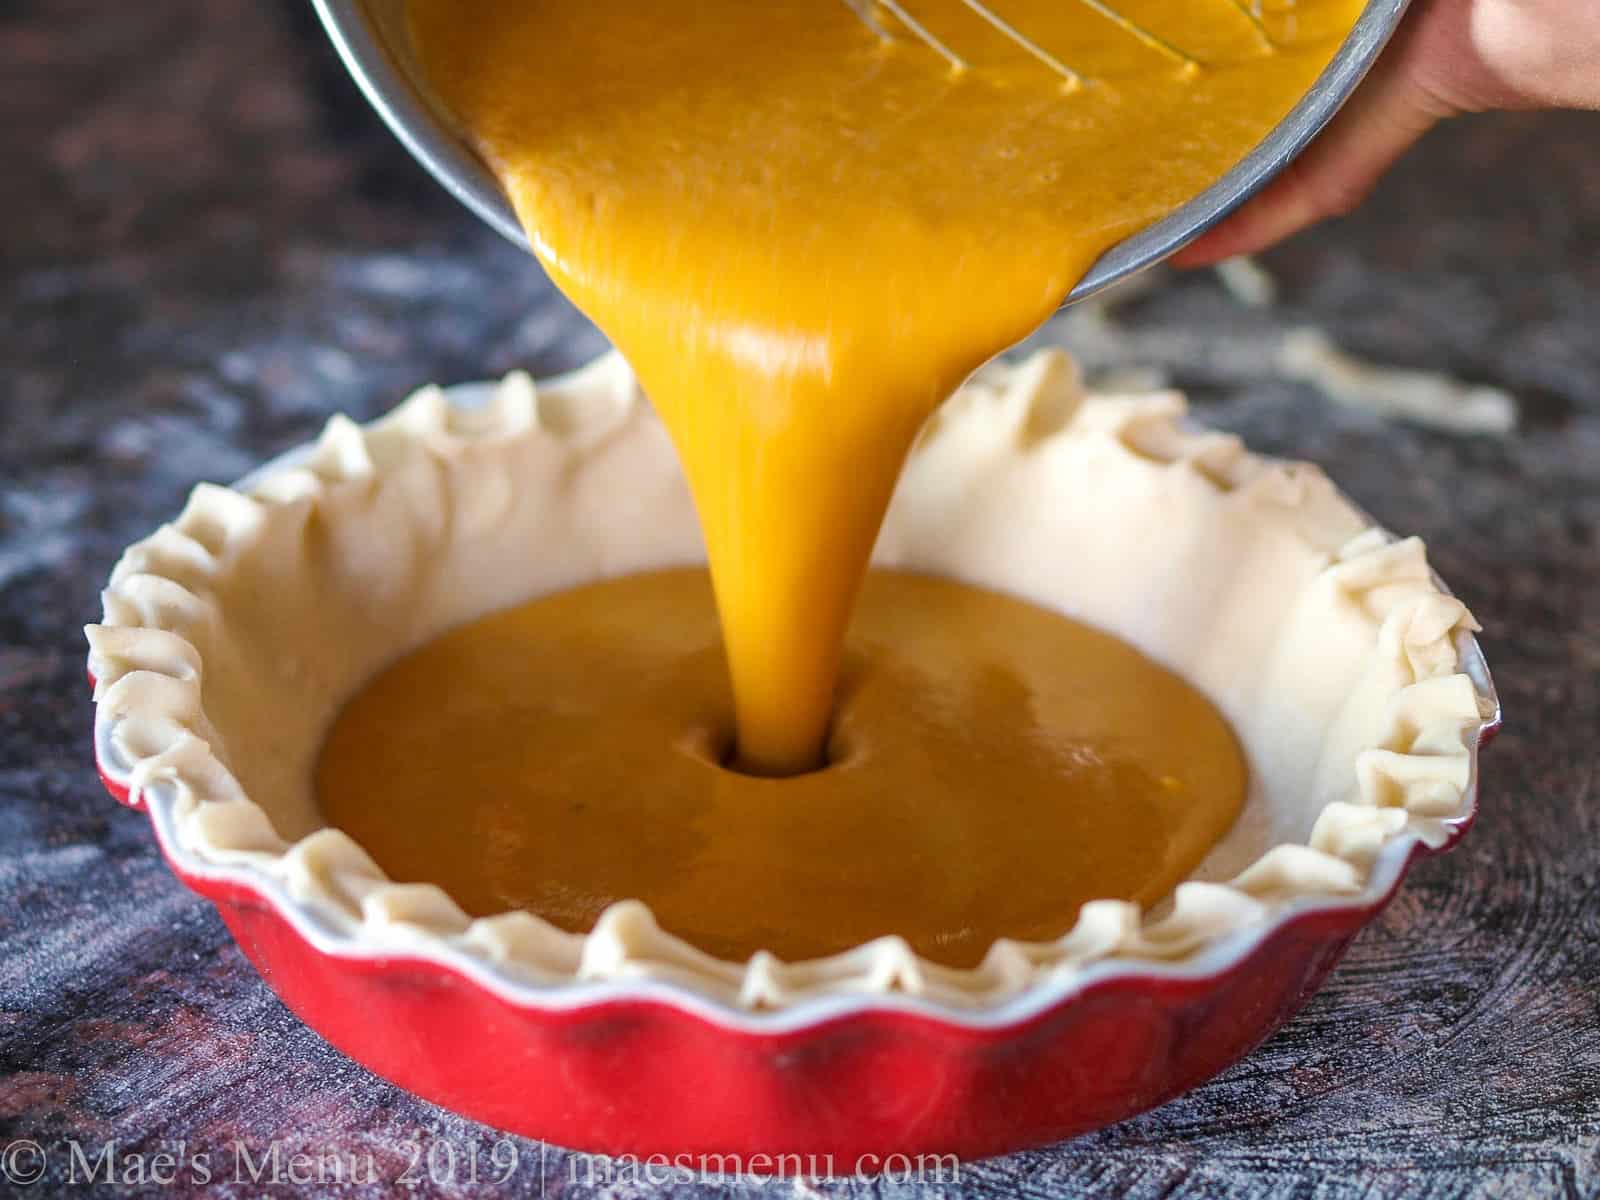 Pouring the pumpkin pie filling into an unbaked pie shell